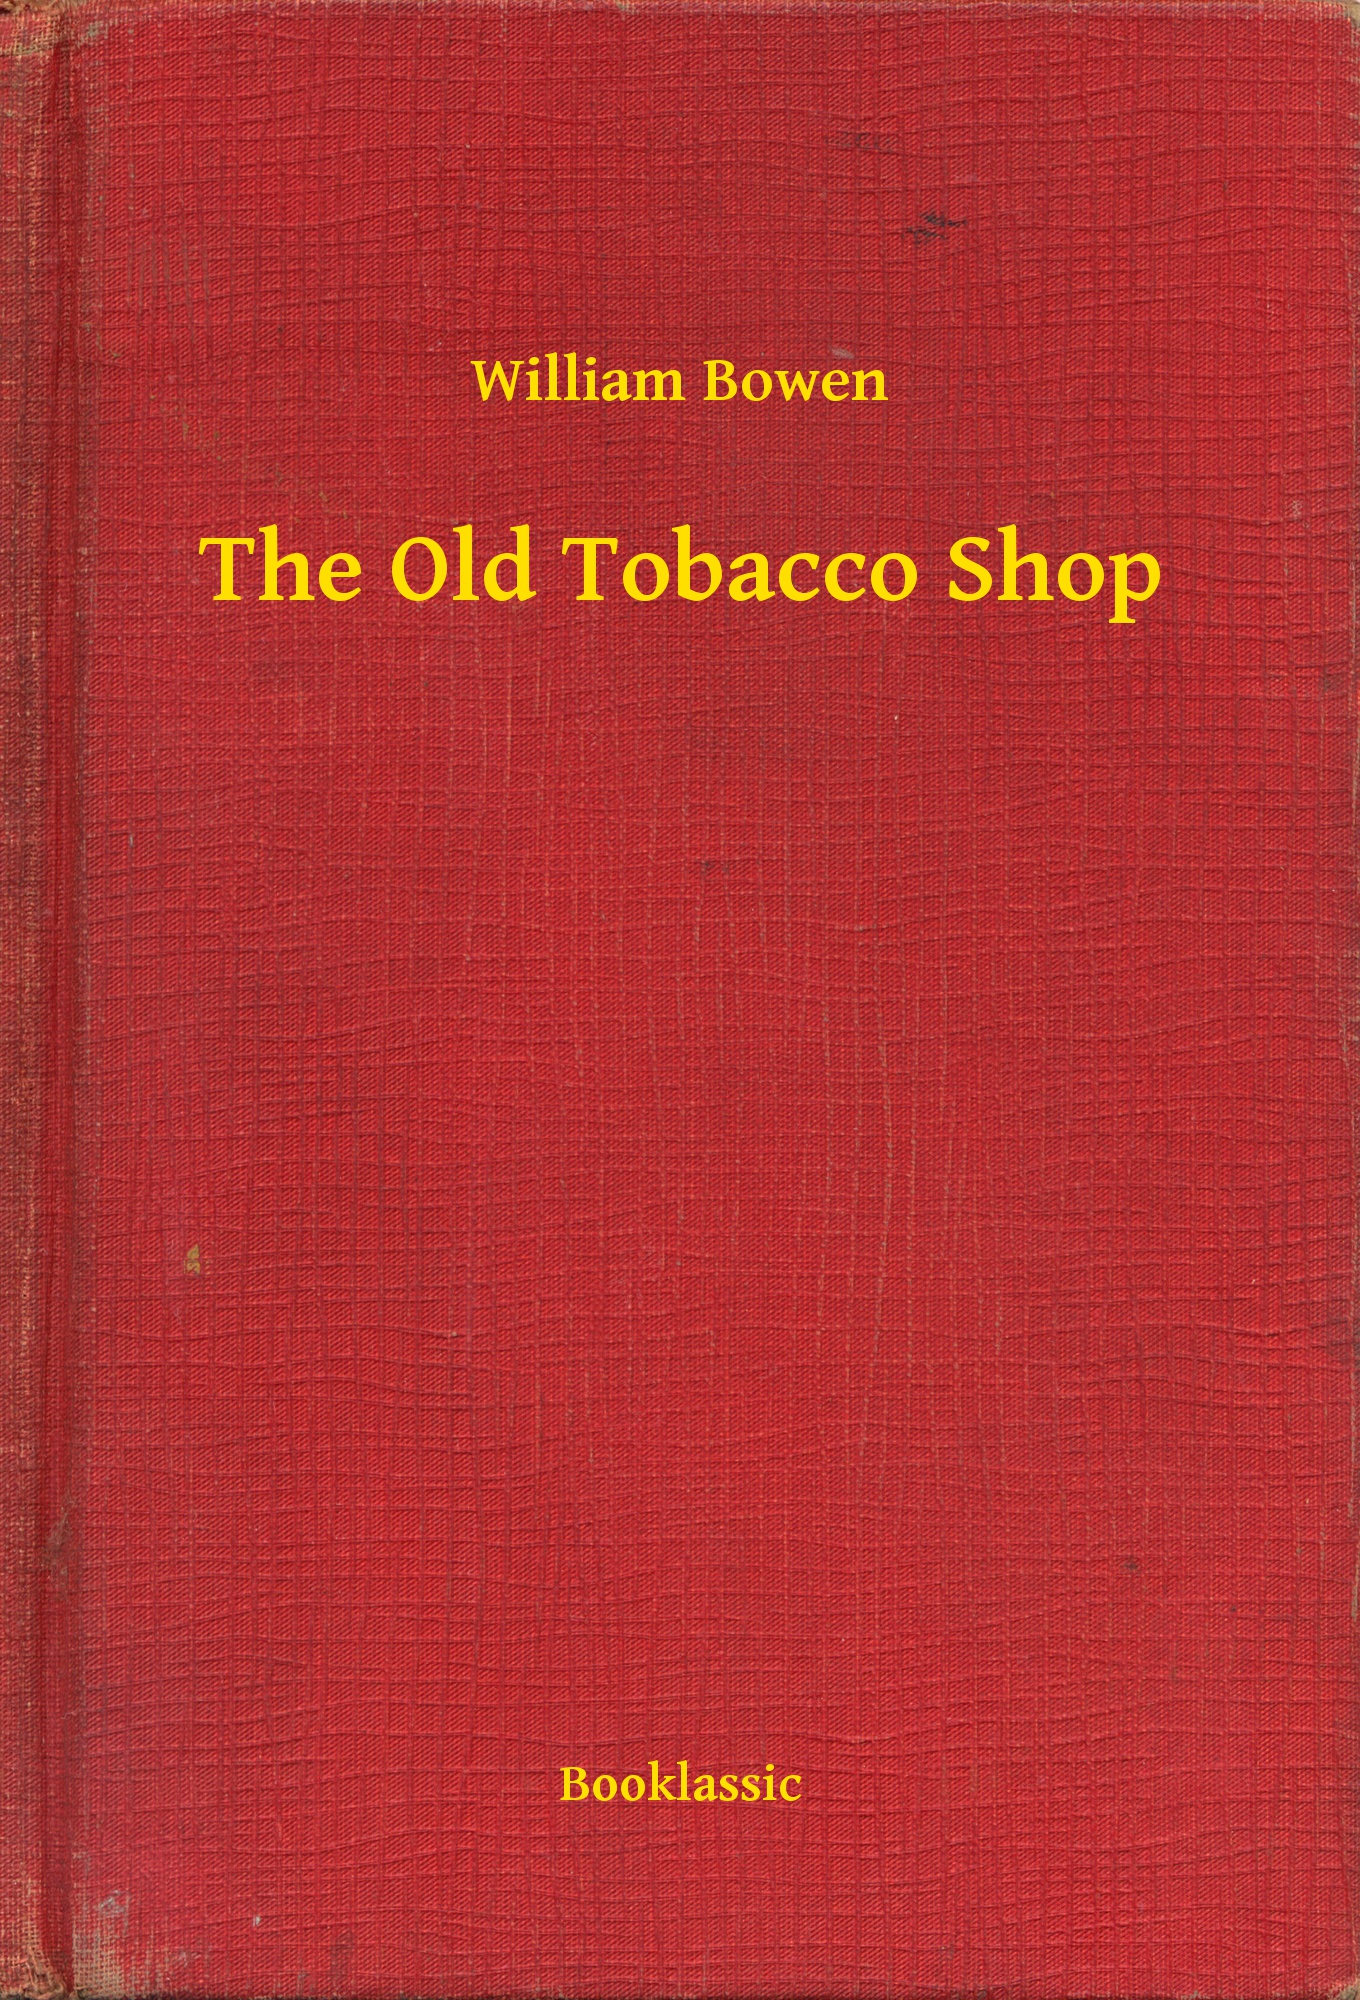 The Old Tobacco Shop